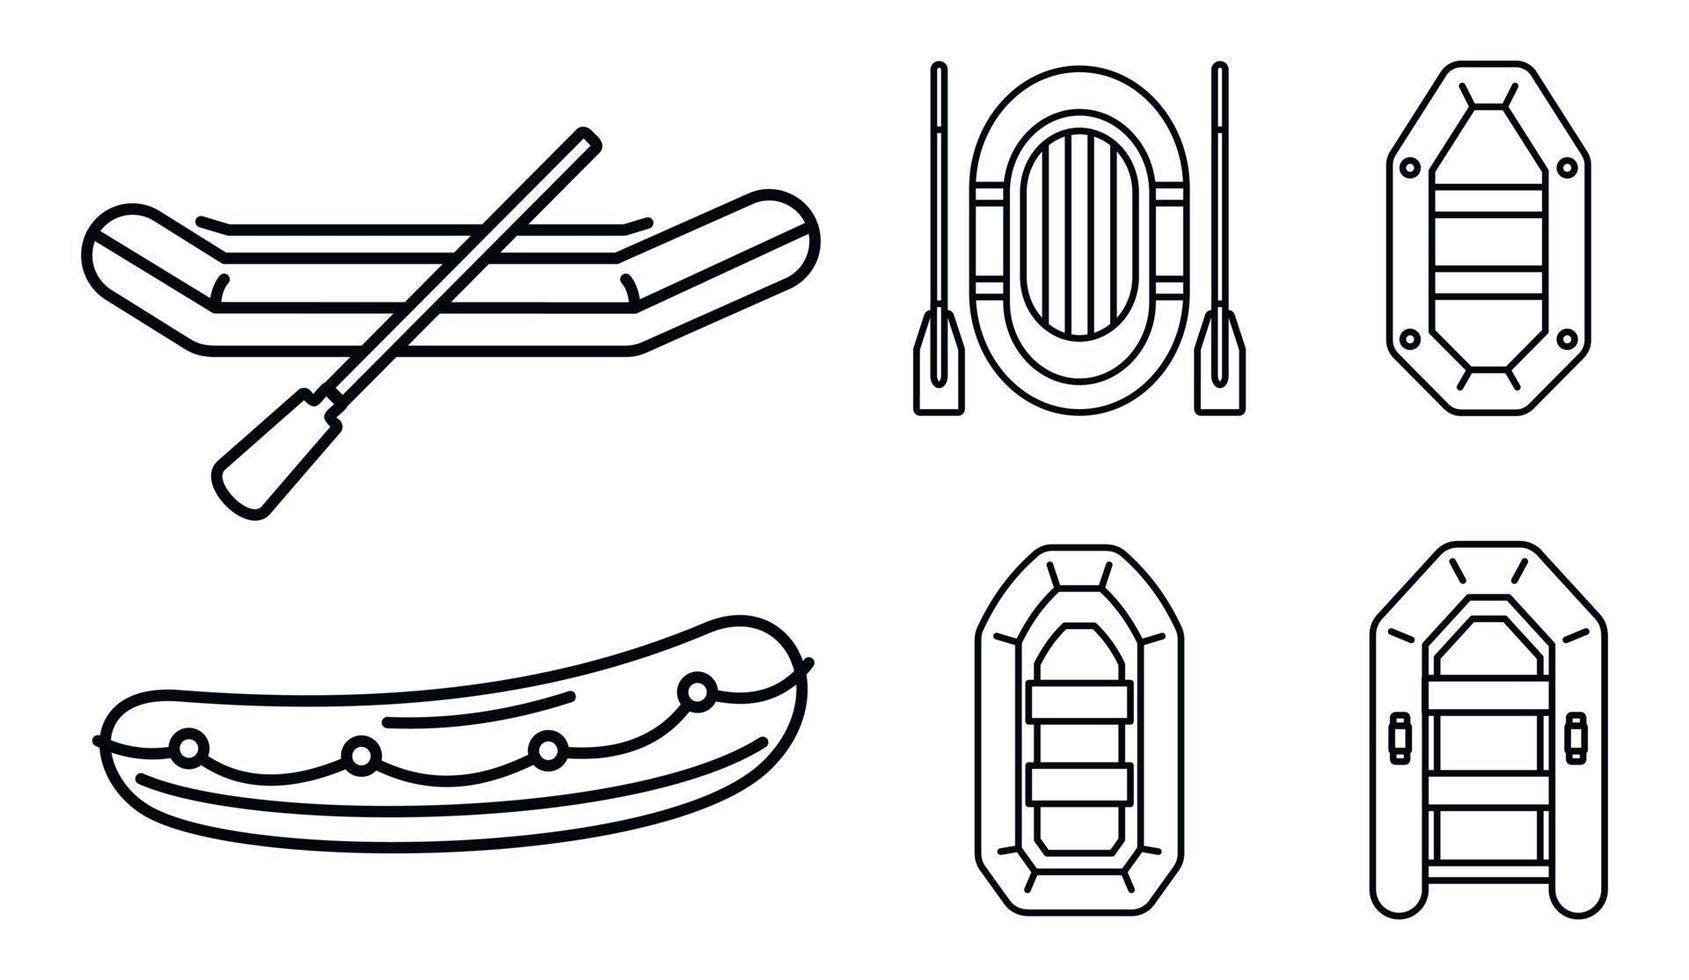 Rubber inflatable boat icon set, outline style vector